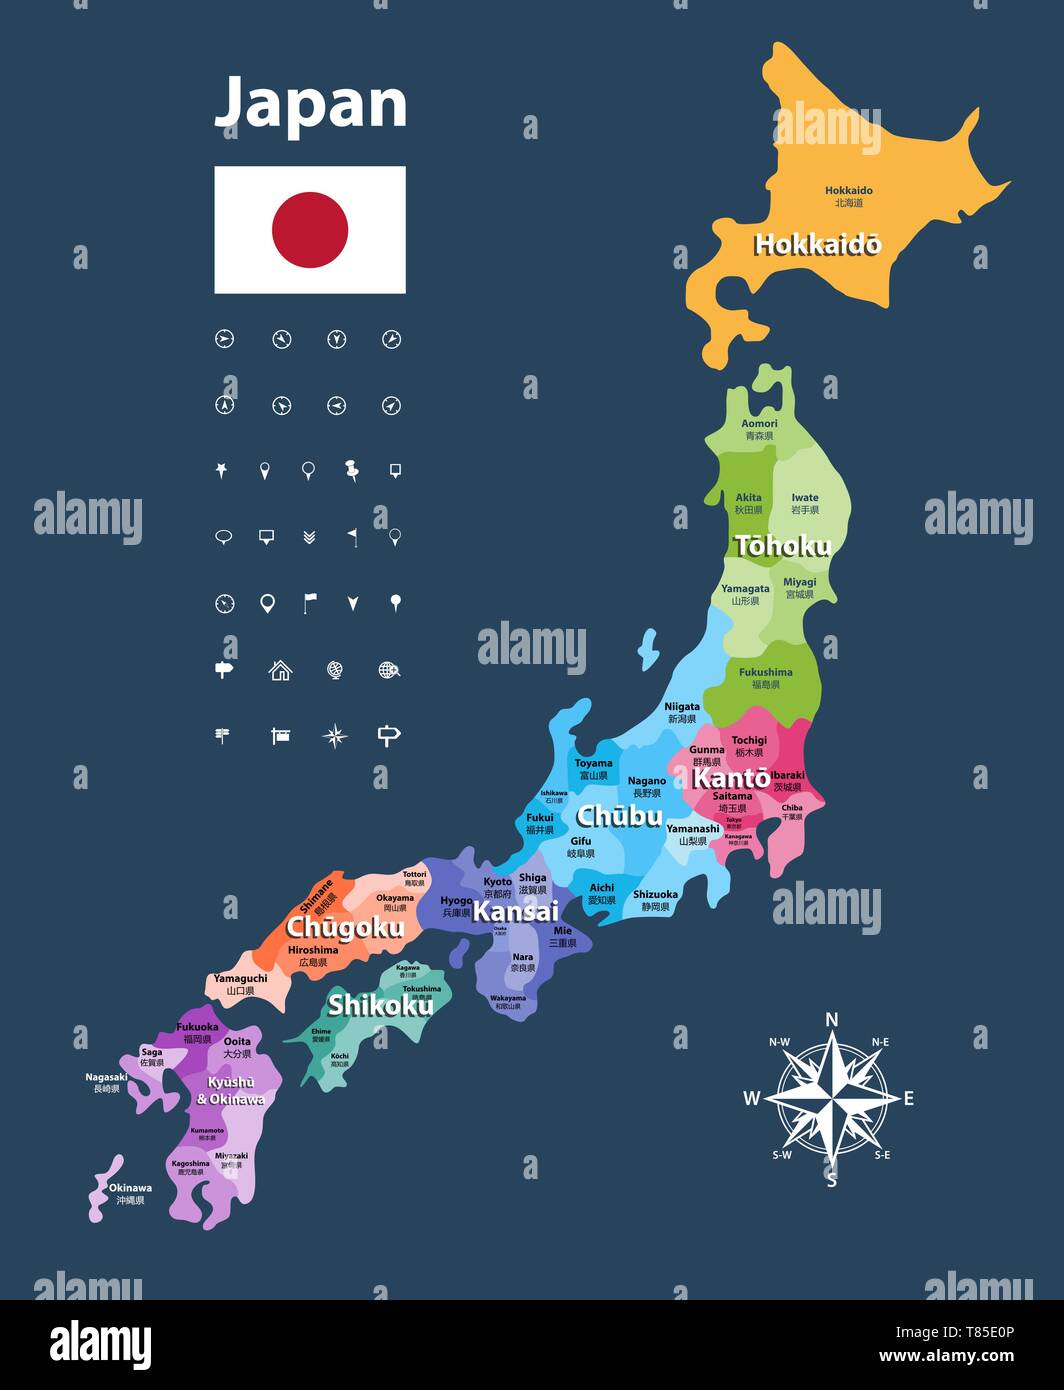 vector illustration of Japanese flag and prefectures map colored by